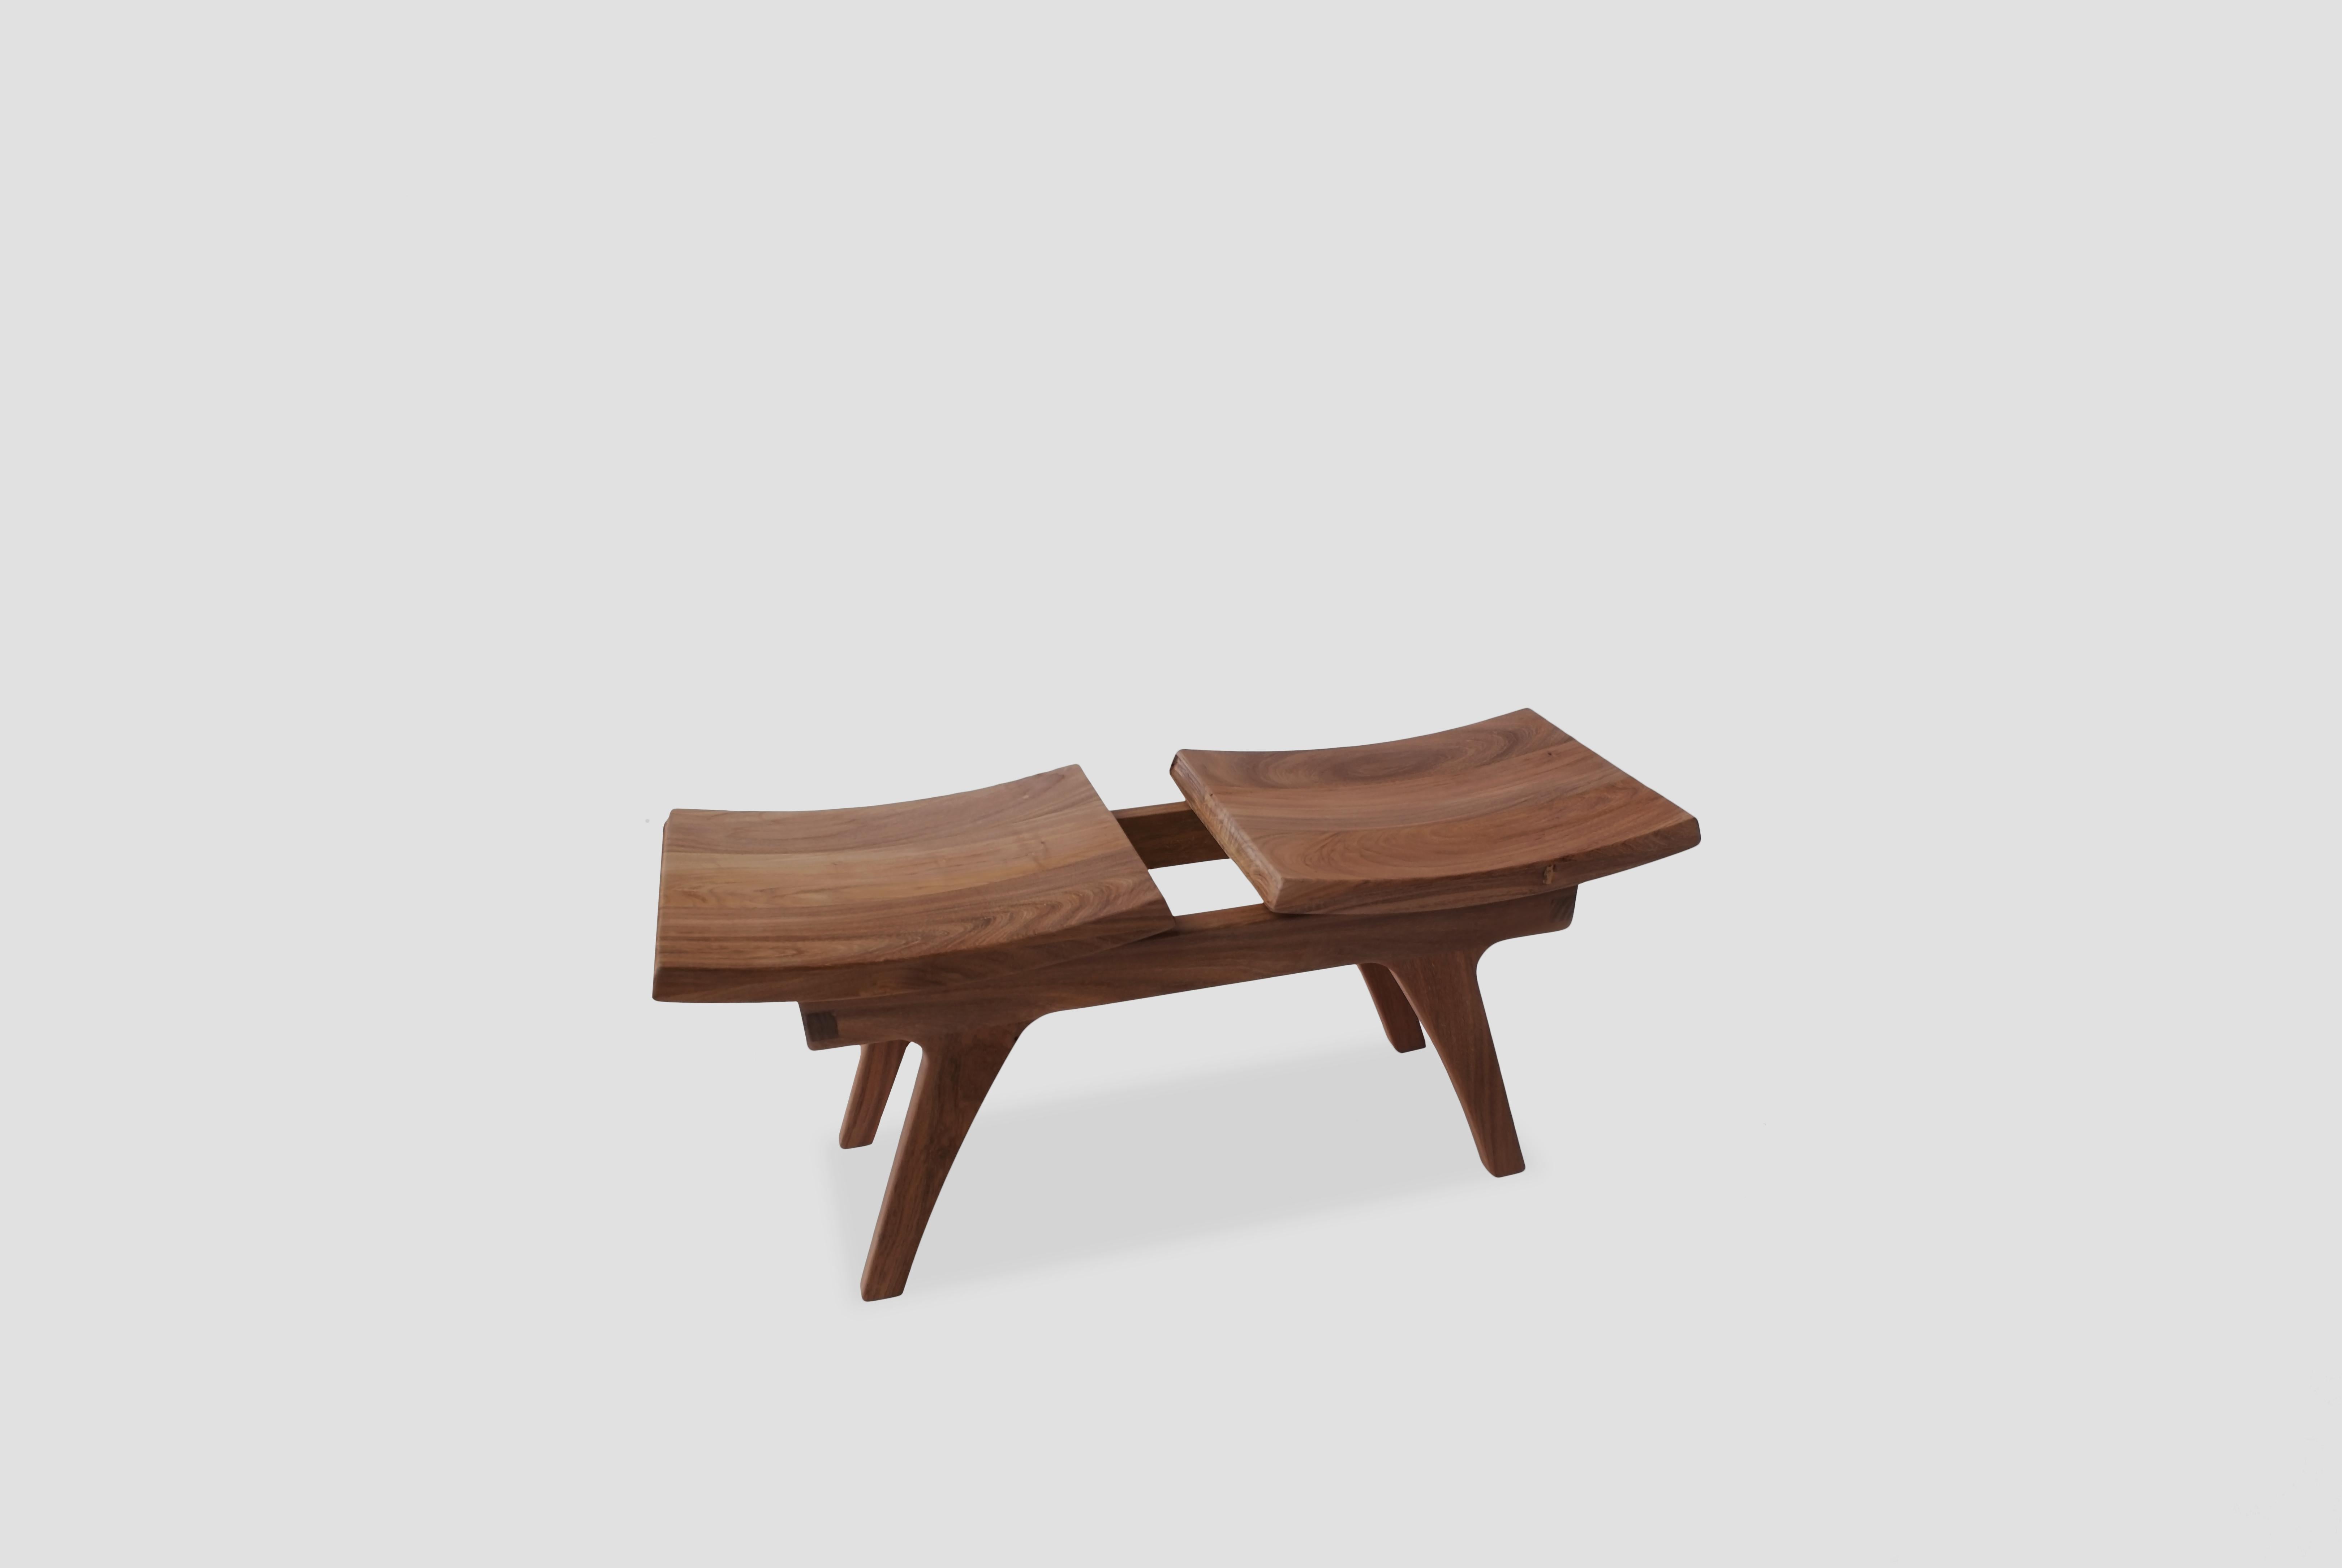 Tripot bench by Arturo Verástegui
Dimensions: D 35 x W 110 x H 45 cm
Materials: walnut wood.

Double bench made of walnut.

Arturo Verástegui has been the director and founder of BREUER since 2015. Arturo began his career in the world of